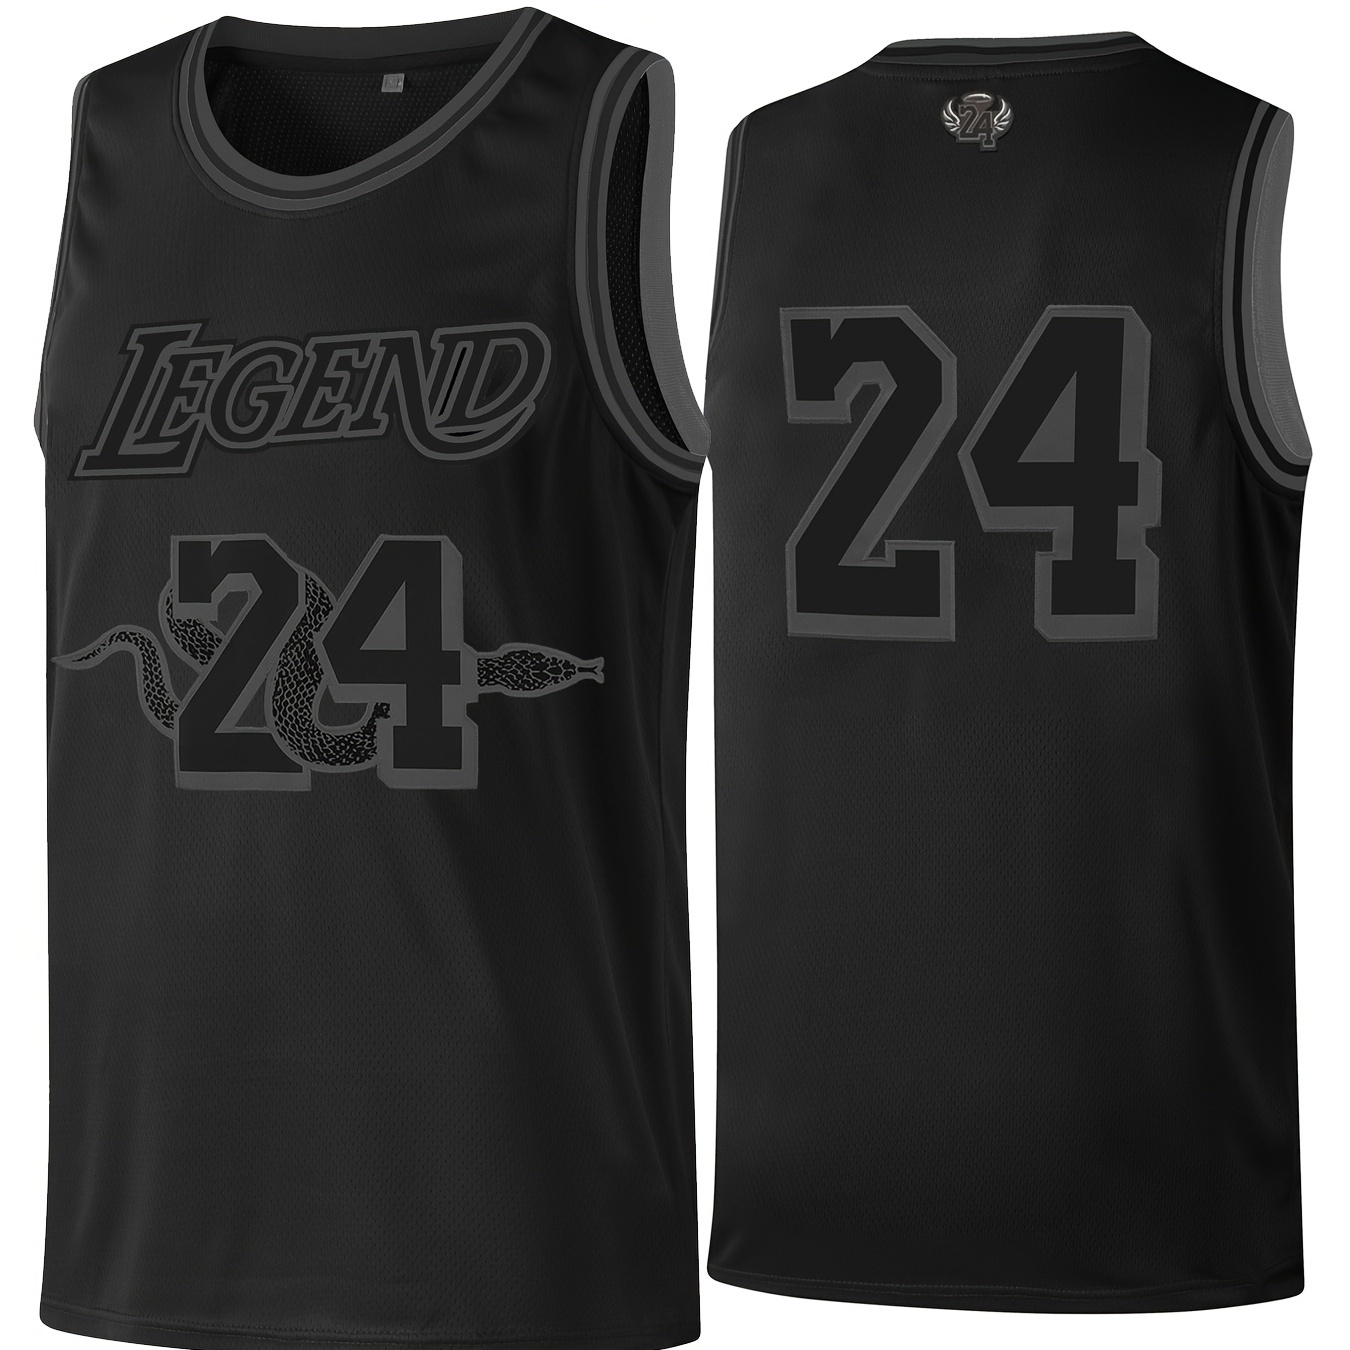 

Men's Legend #24 Basketball Jersey, Retro Embroidery Breathable Sports Uniform, Sleeveless Basketball Shirt For Training Competition Party Costume Gift